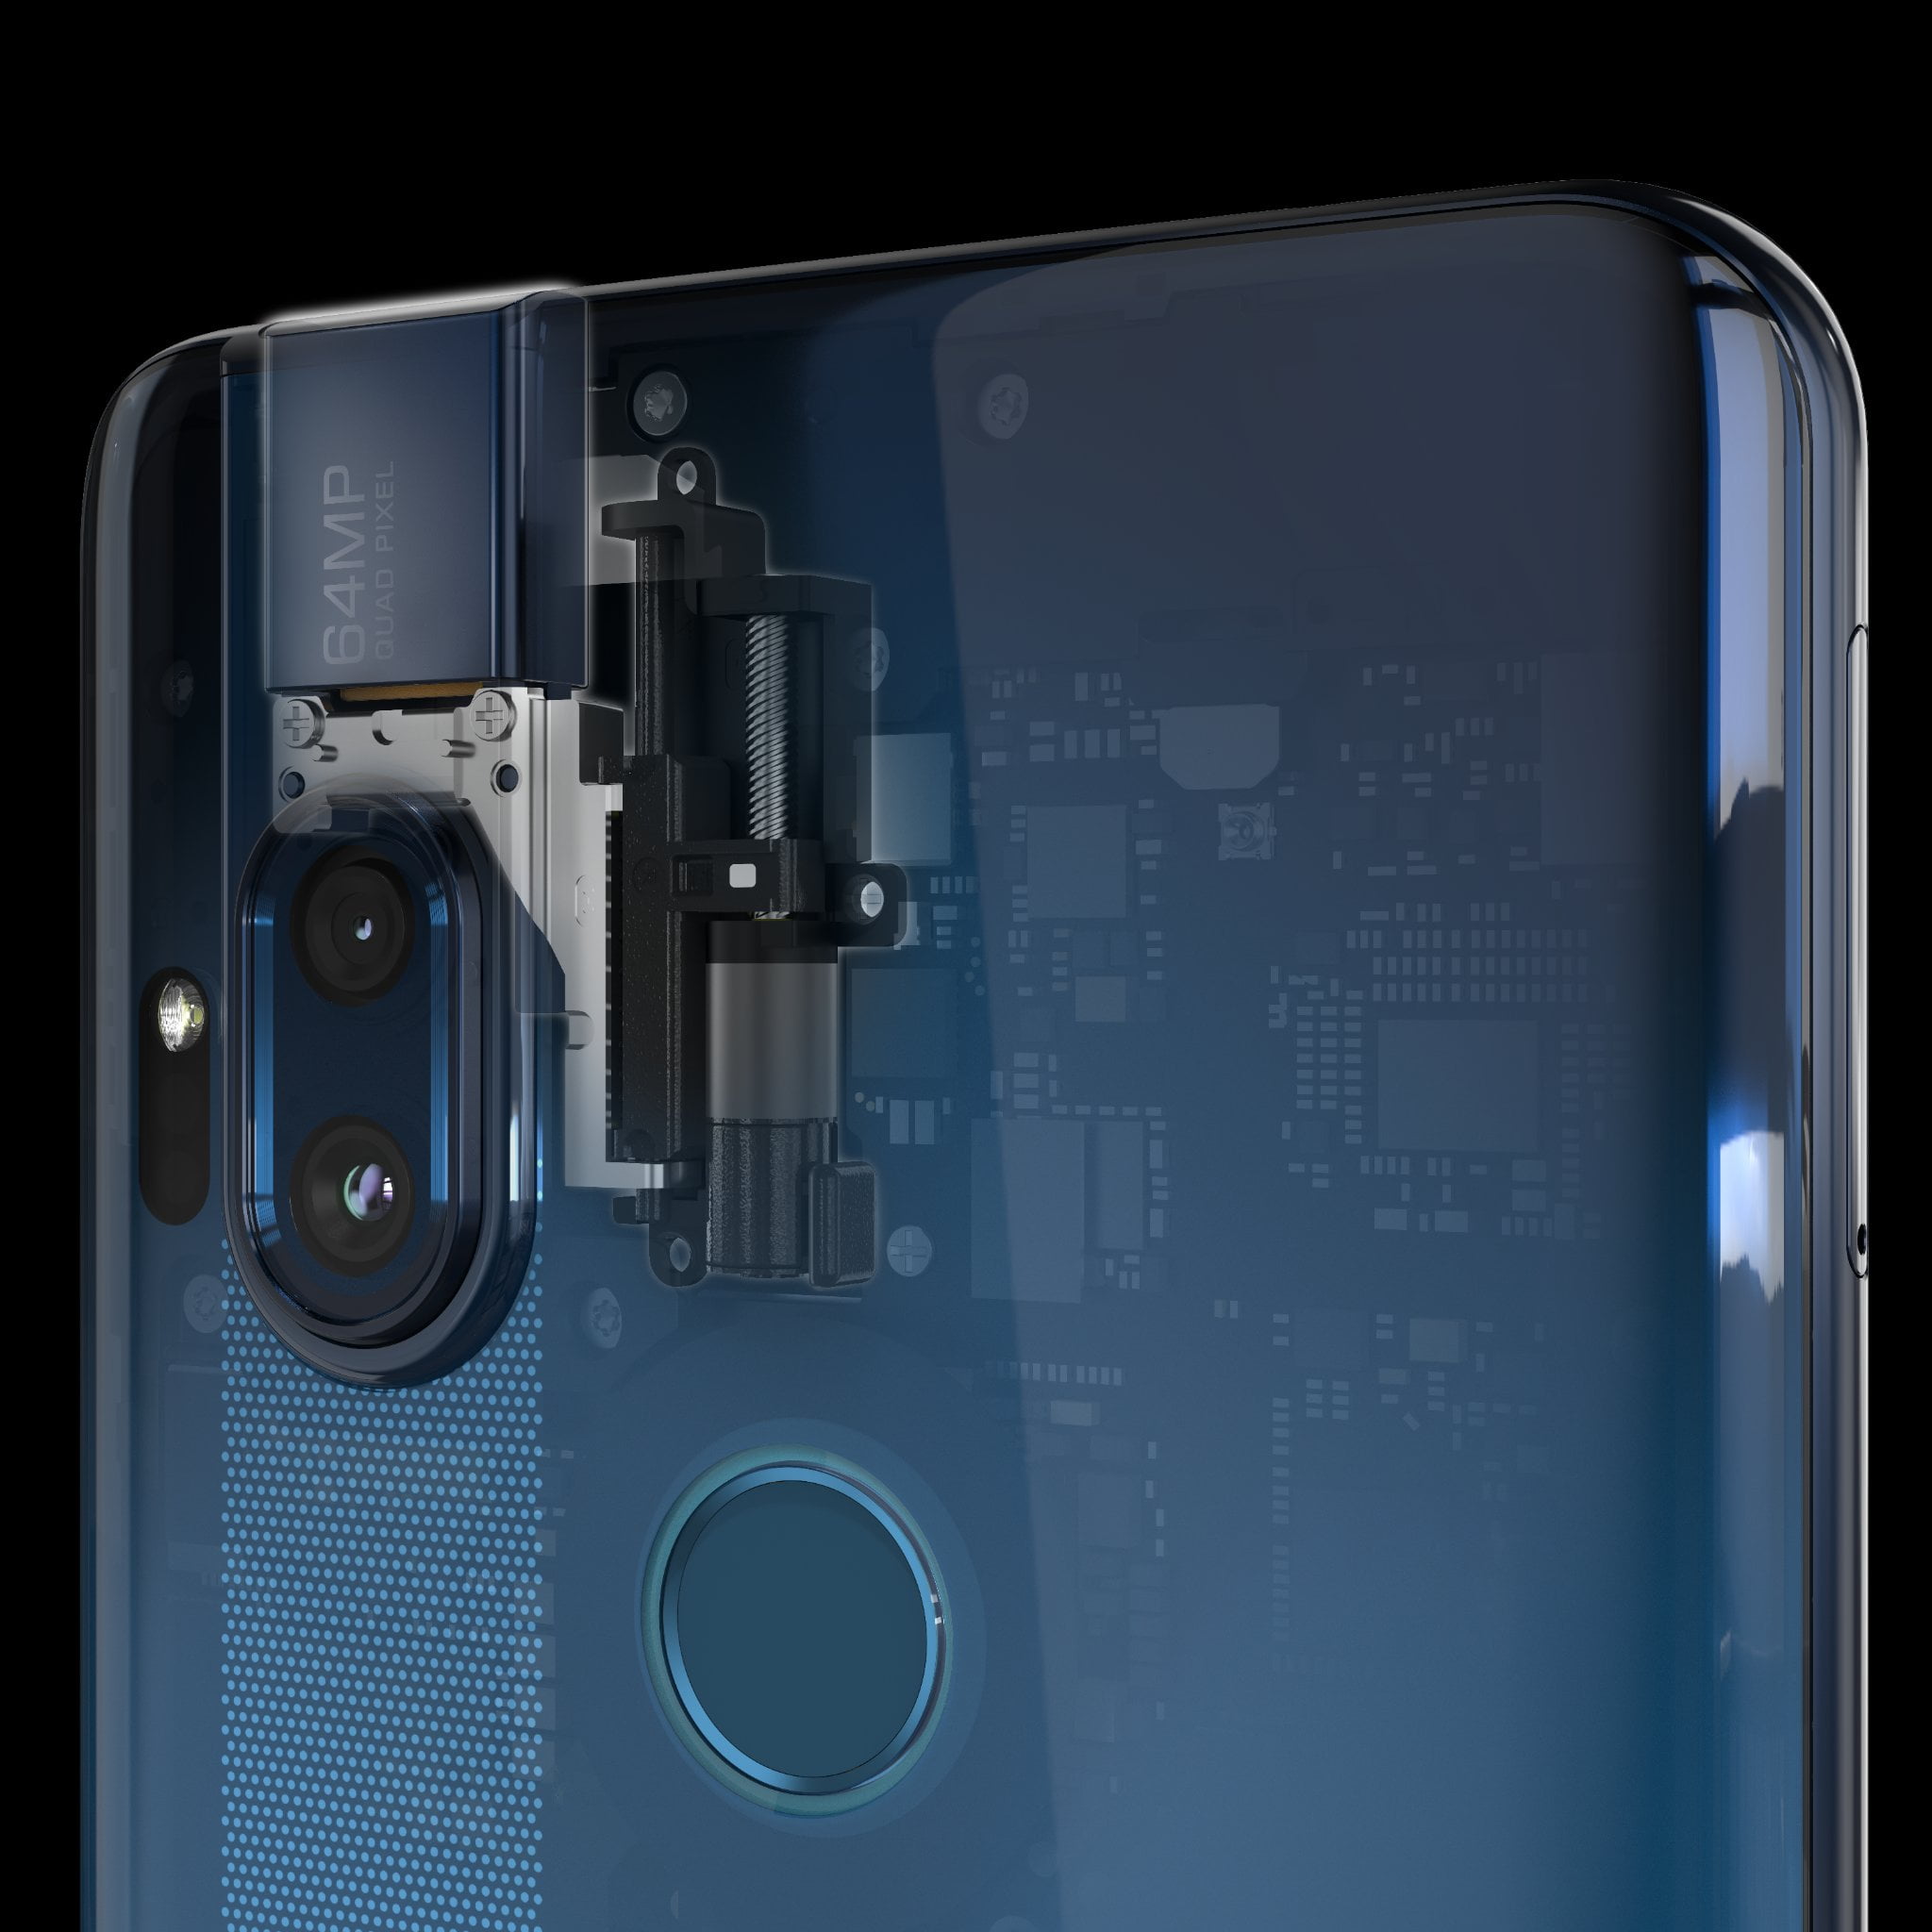 Motorola One Hyper Unveiled With Pop-up Camera